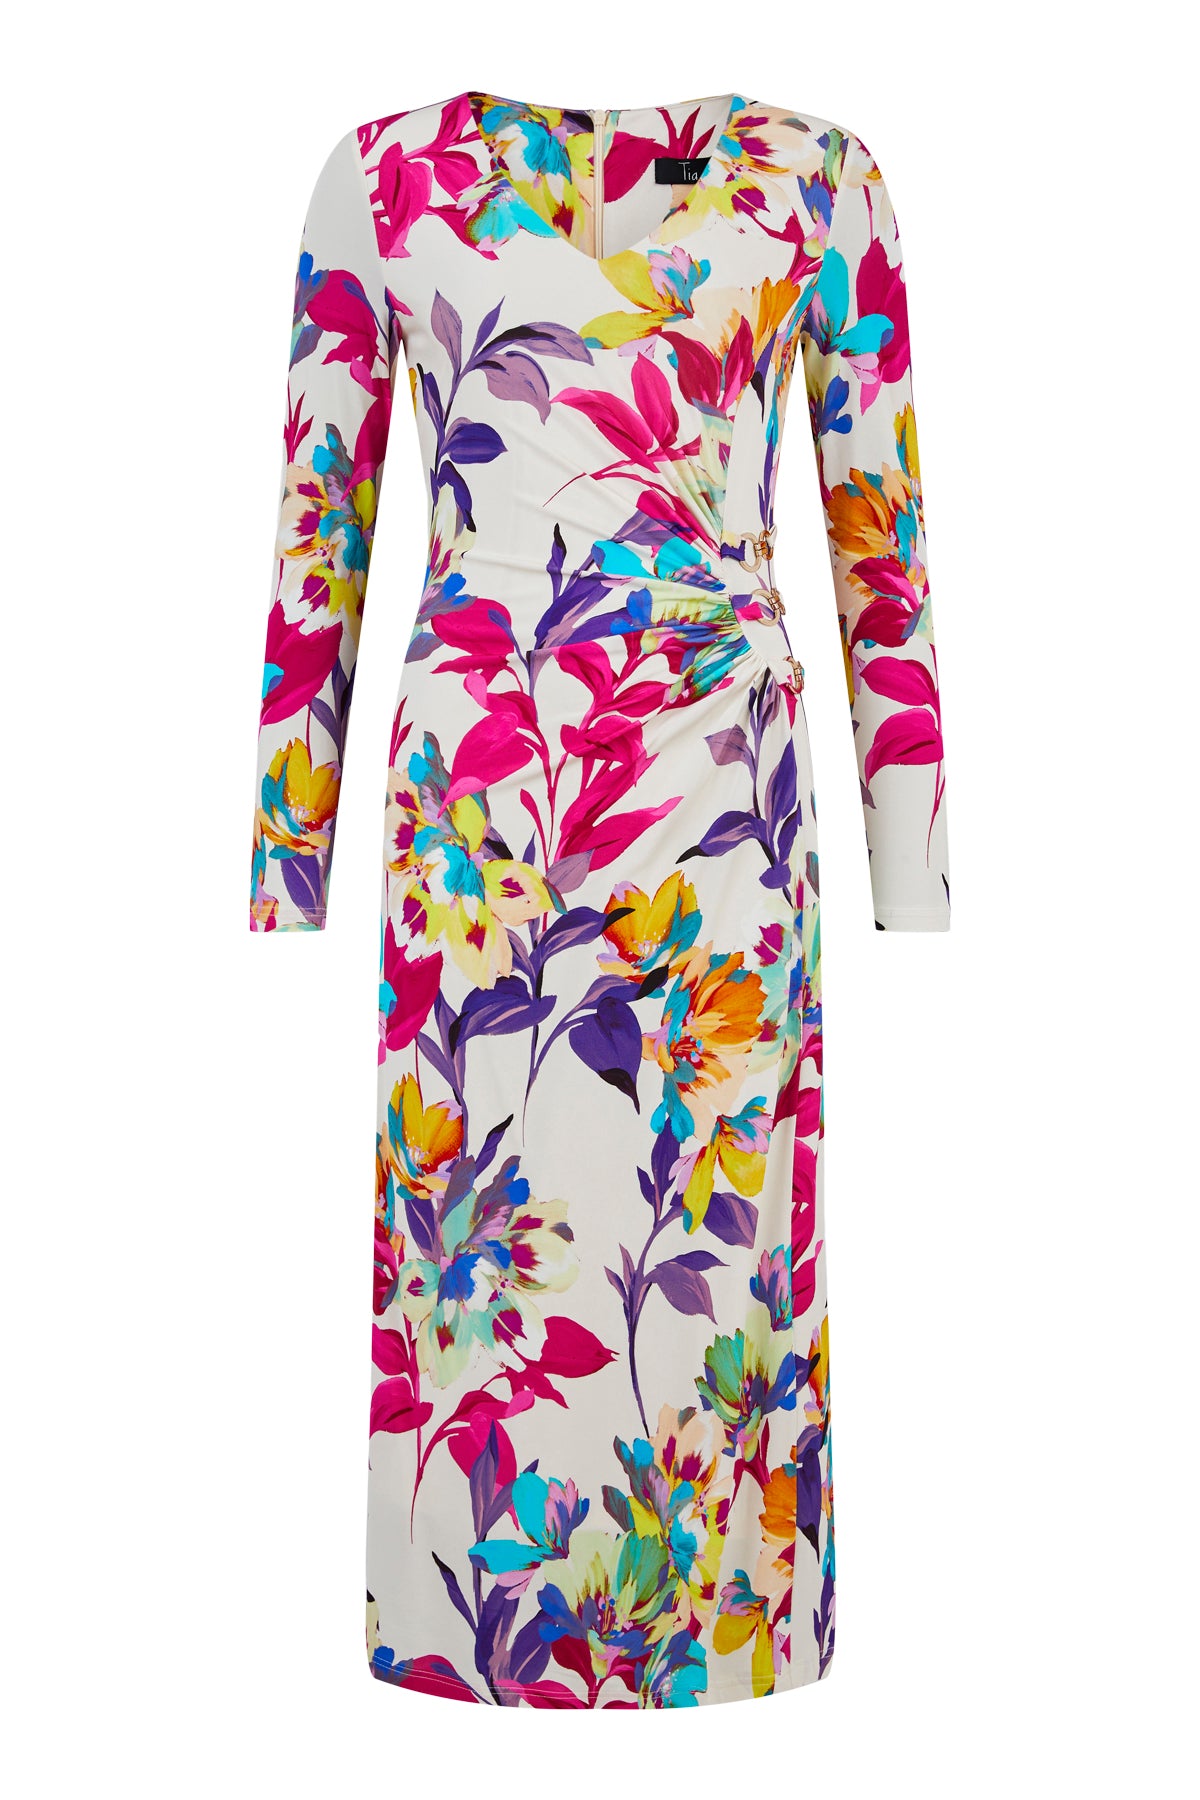 Tia 78346 Multi Coloured Print Dress with Long Sleeves